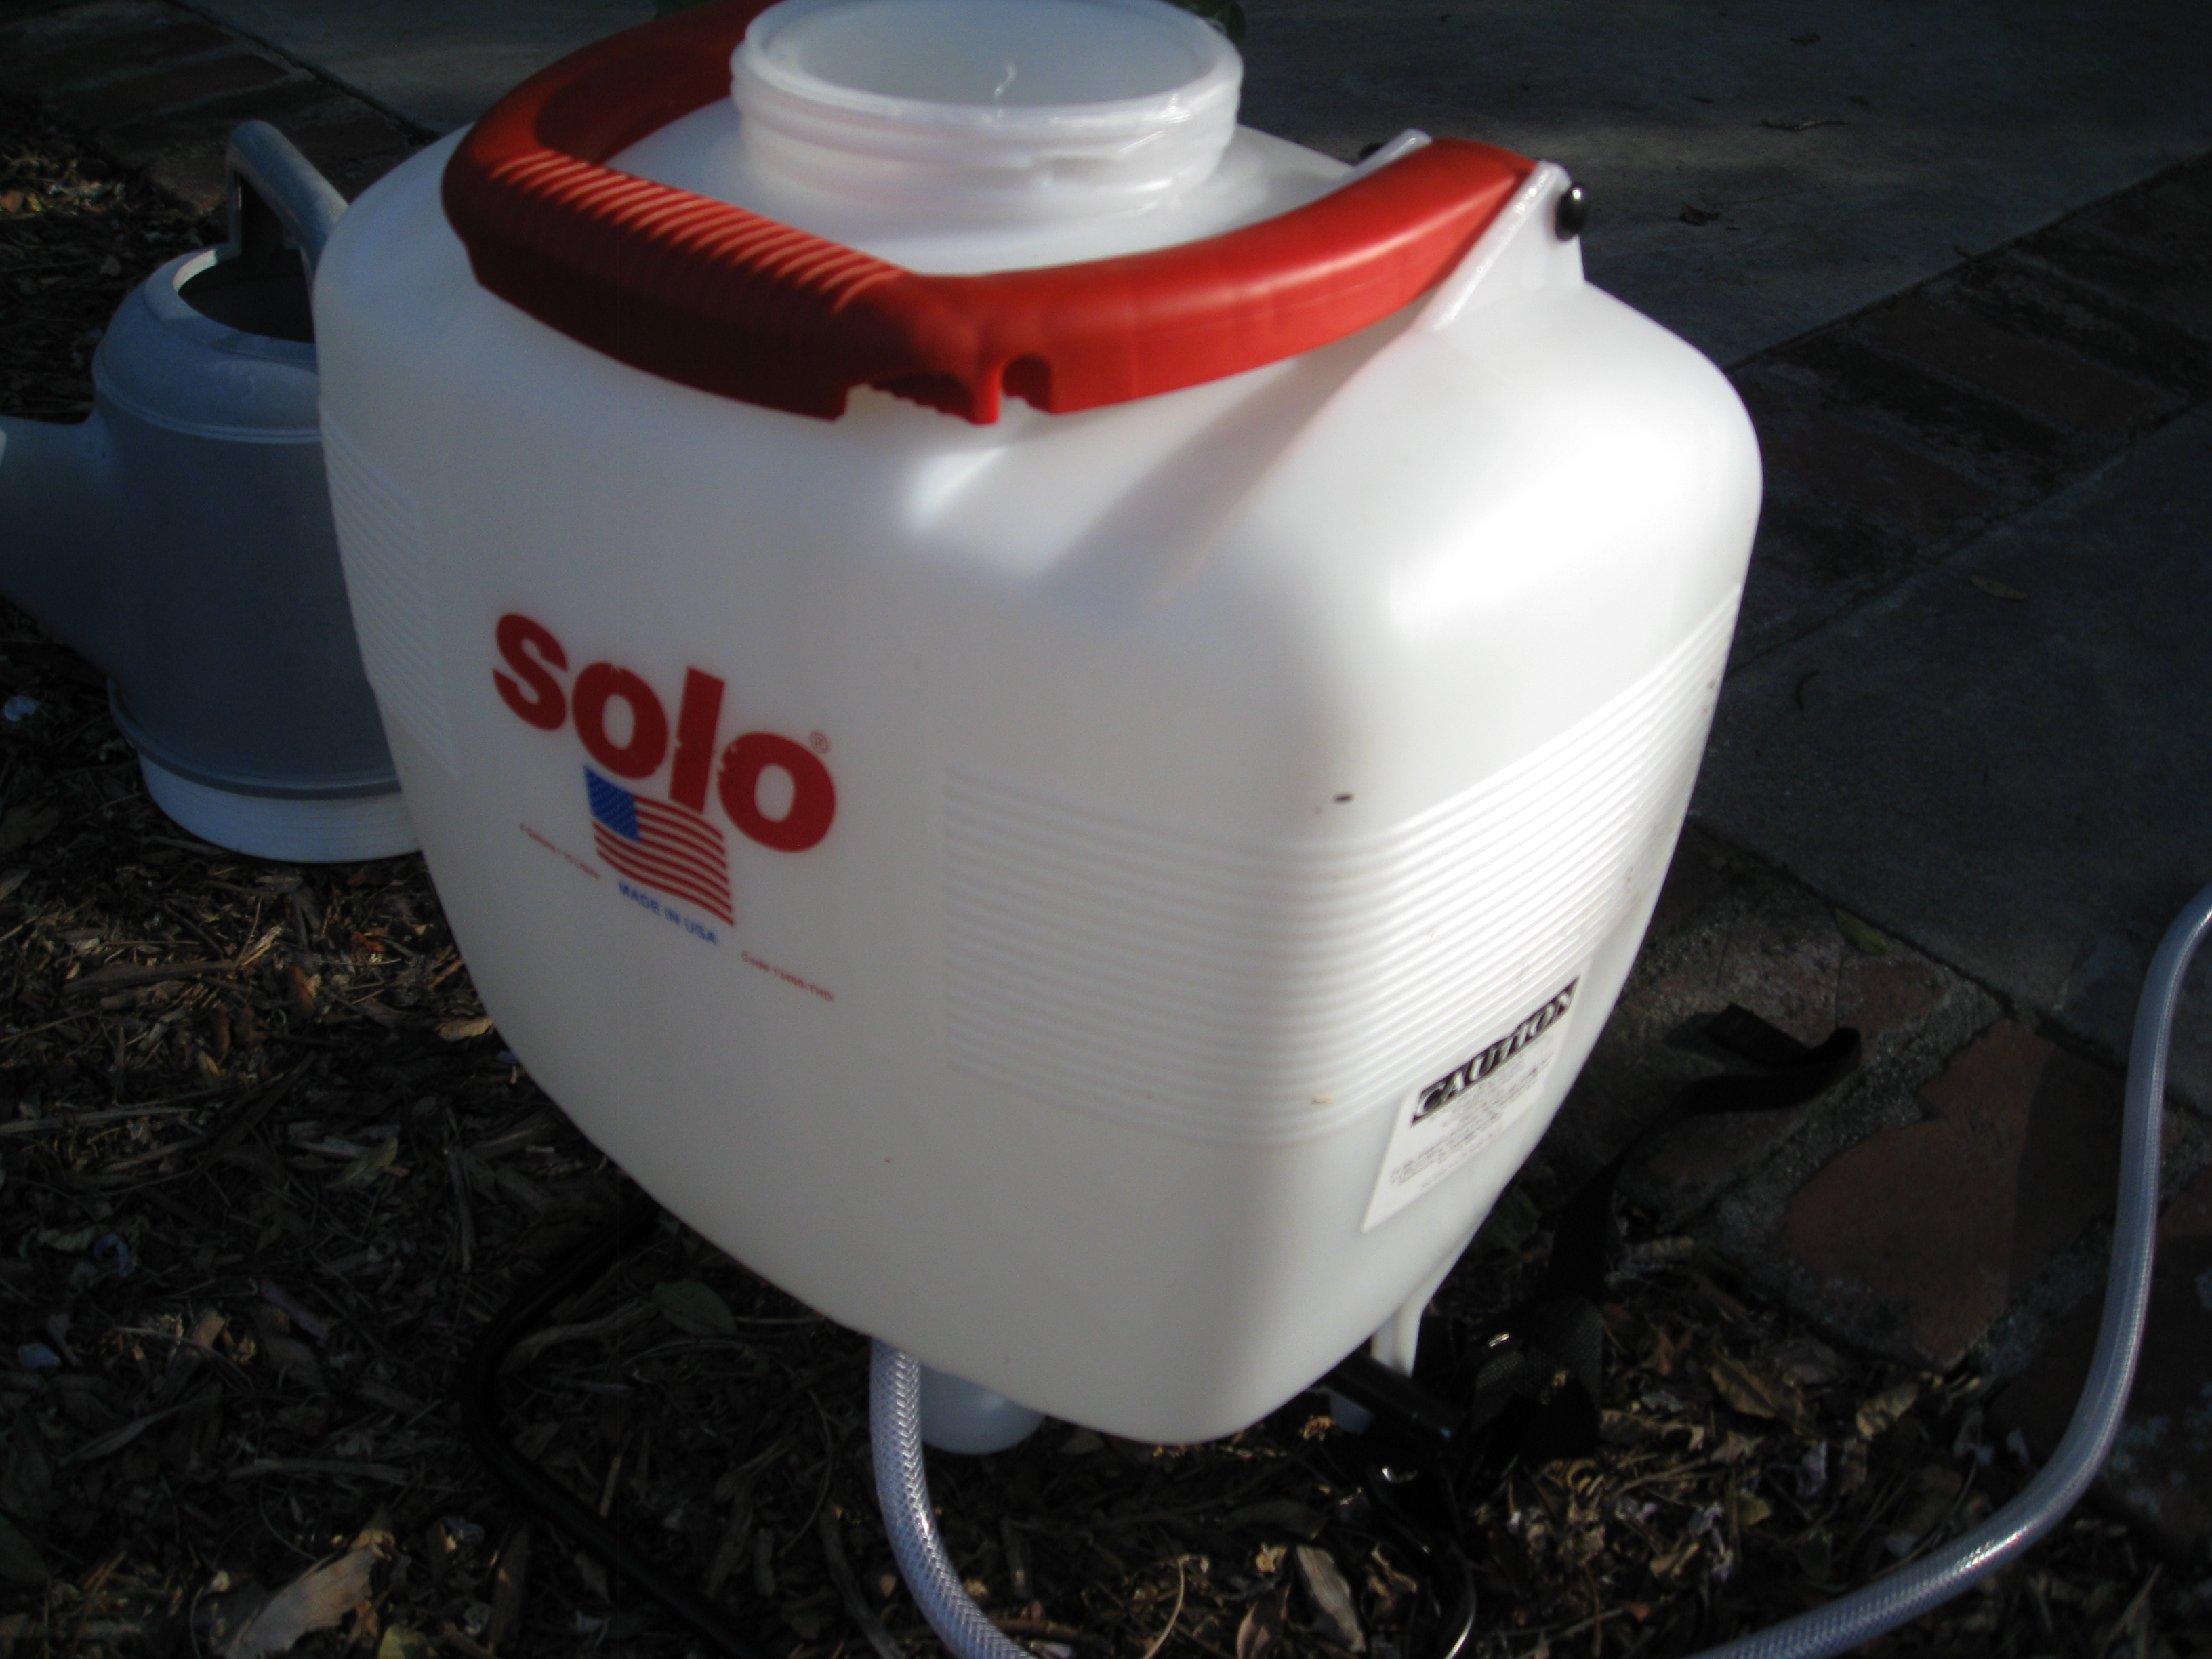 Solo is made in the USA and sold at many hardware stores. 